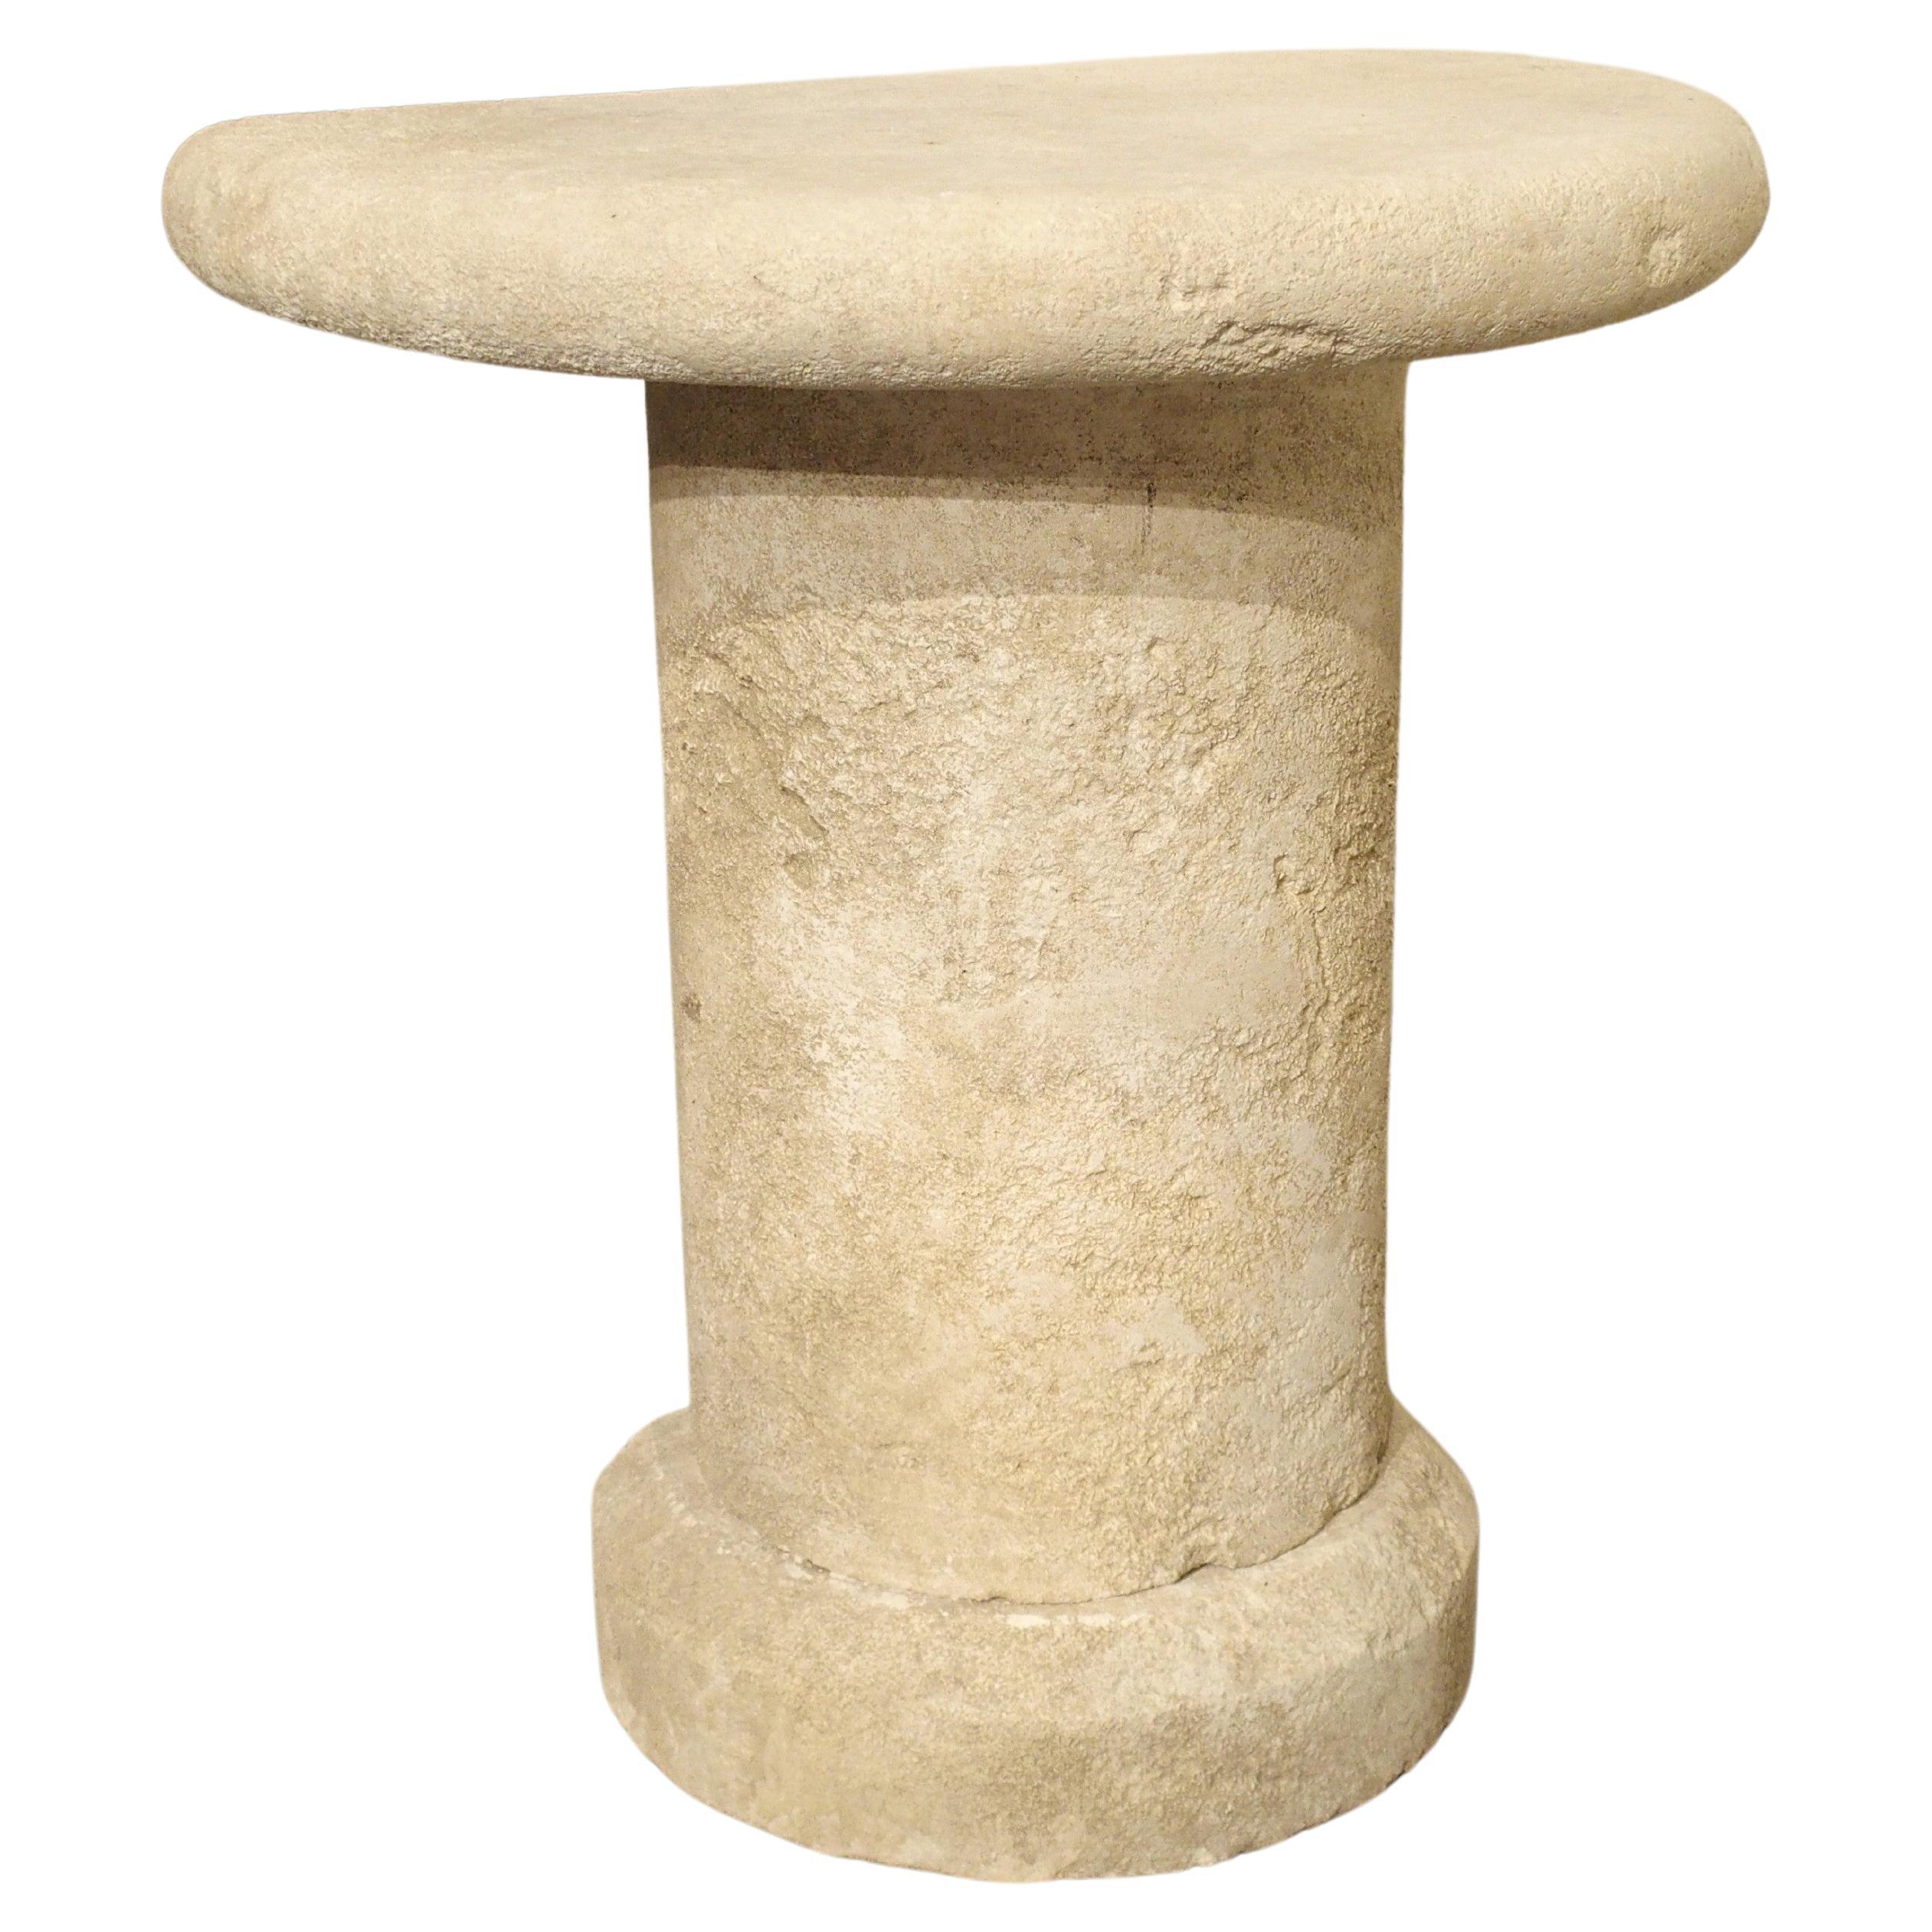 Small Demilune Console Table in Carved Limestone from Provence, France